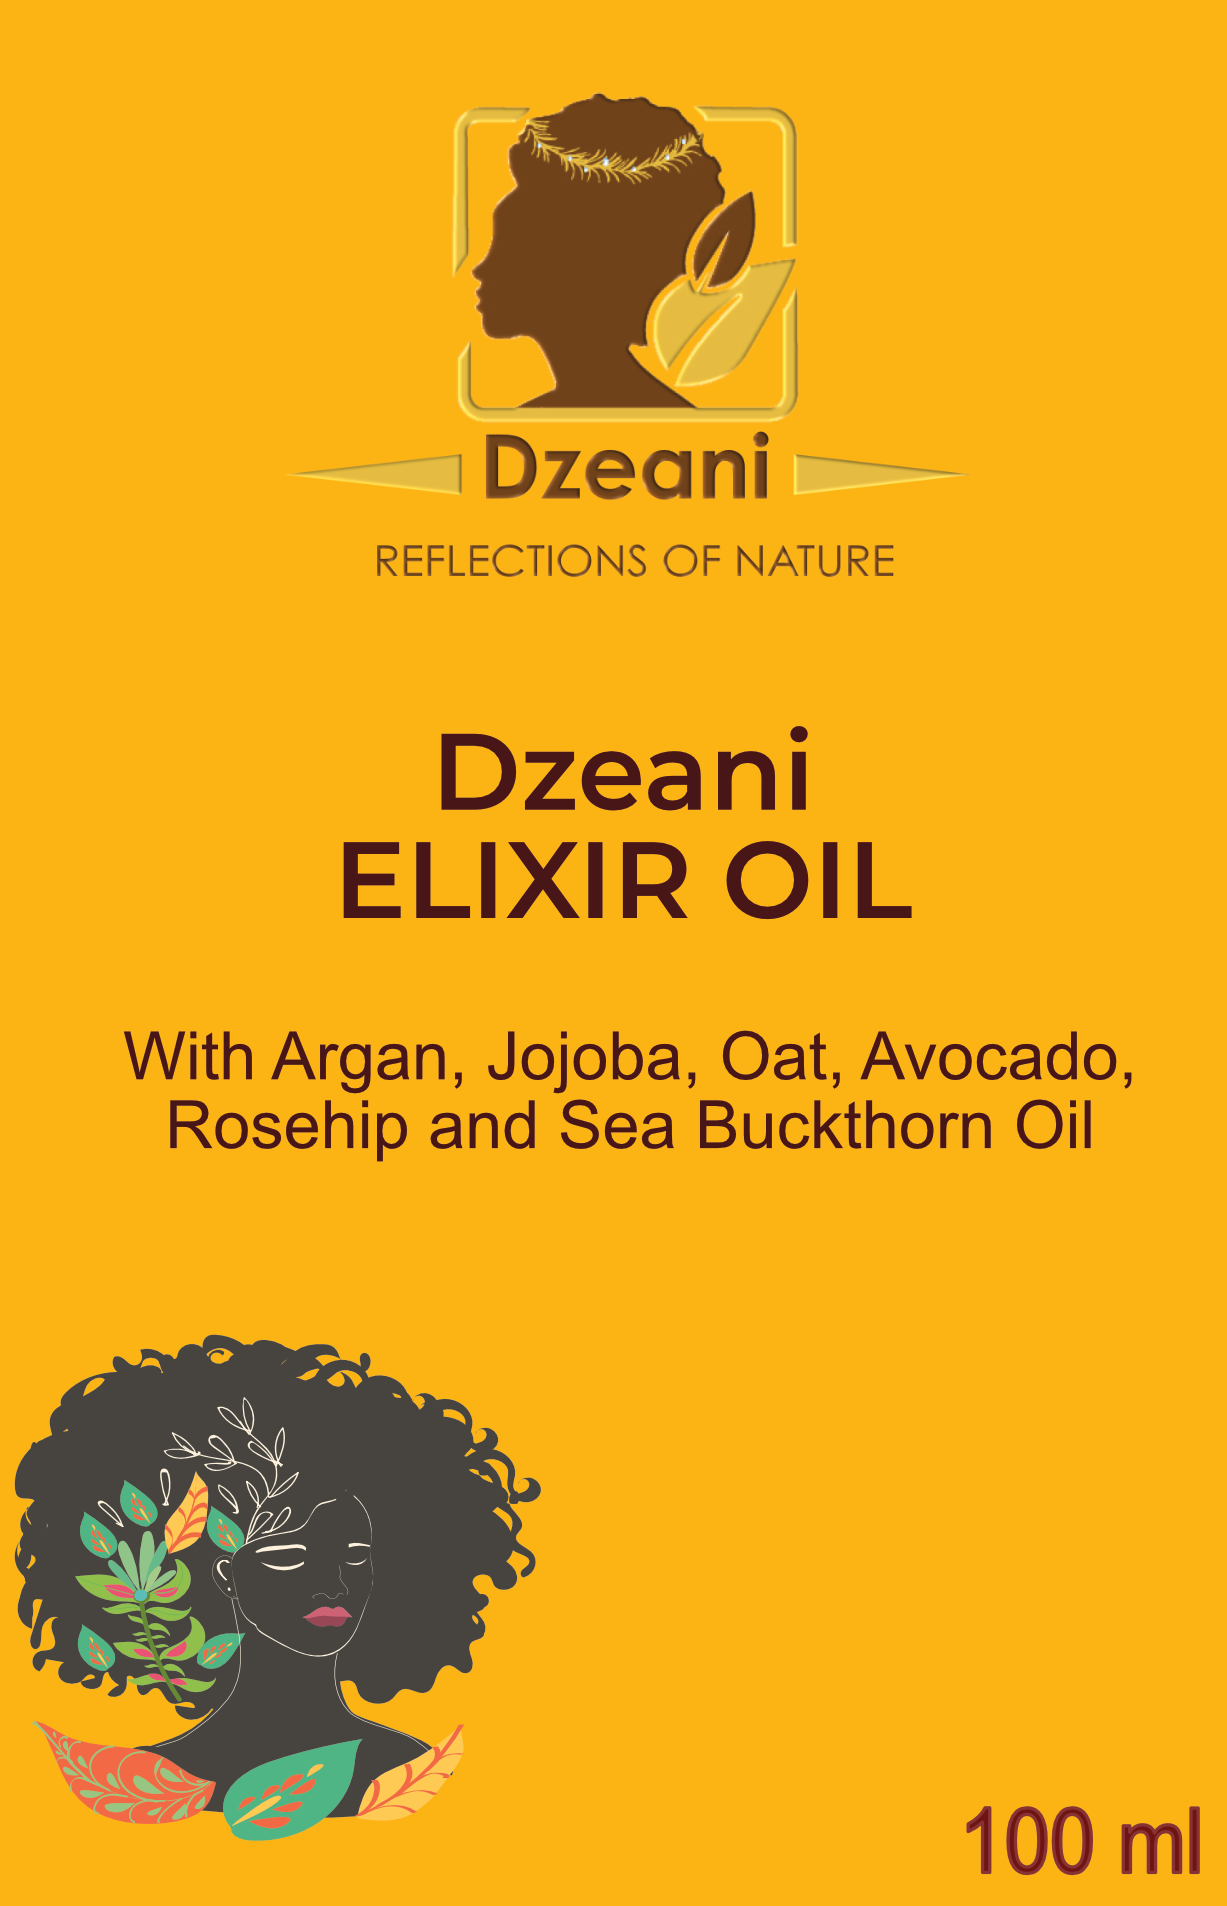 ﻿In our Ultimate Hair Care package, we have selected all the products that you will need to cleanse, treat, condition and style your amazing curls - Dzeani -